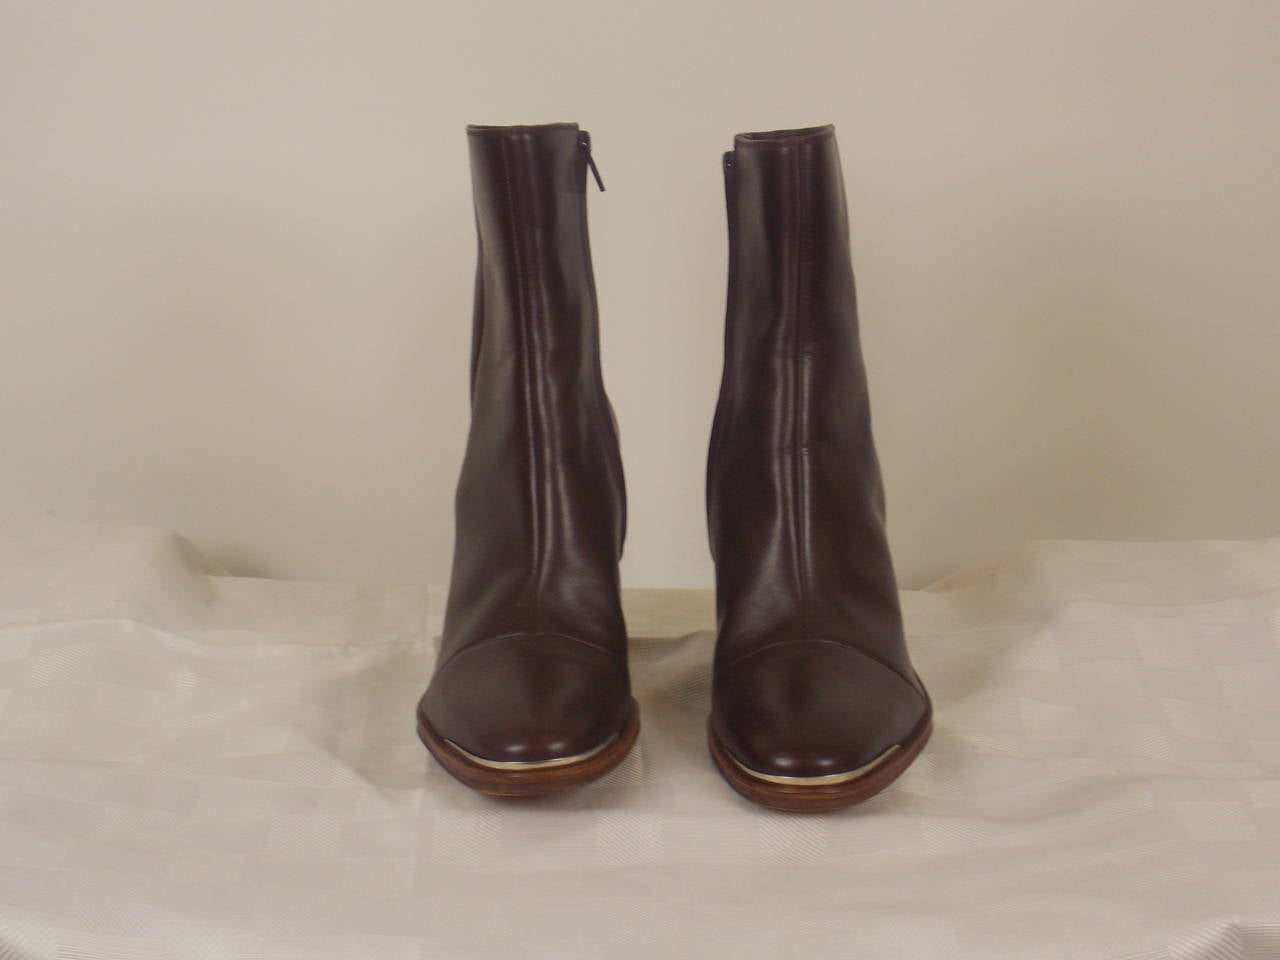 Celine brown leather ankle booties with 1 inch wood heel, and side zip closure.